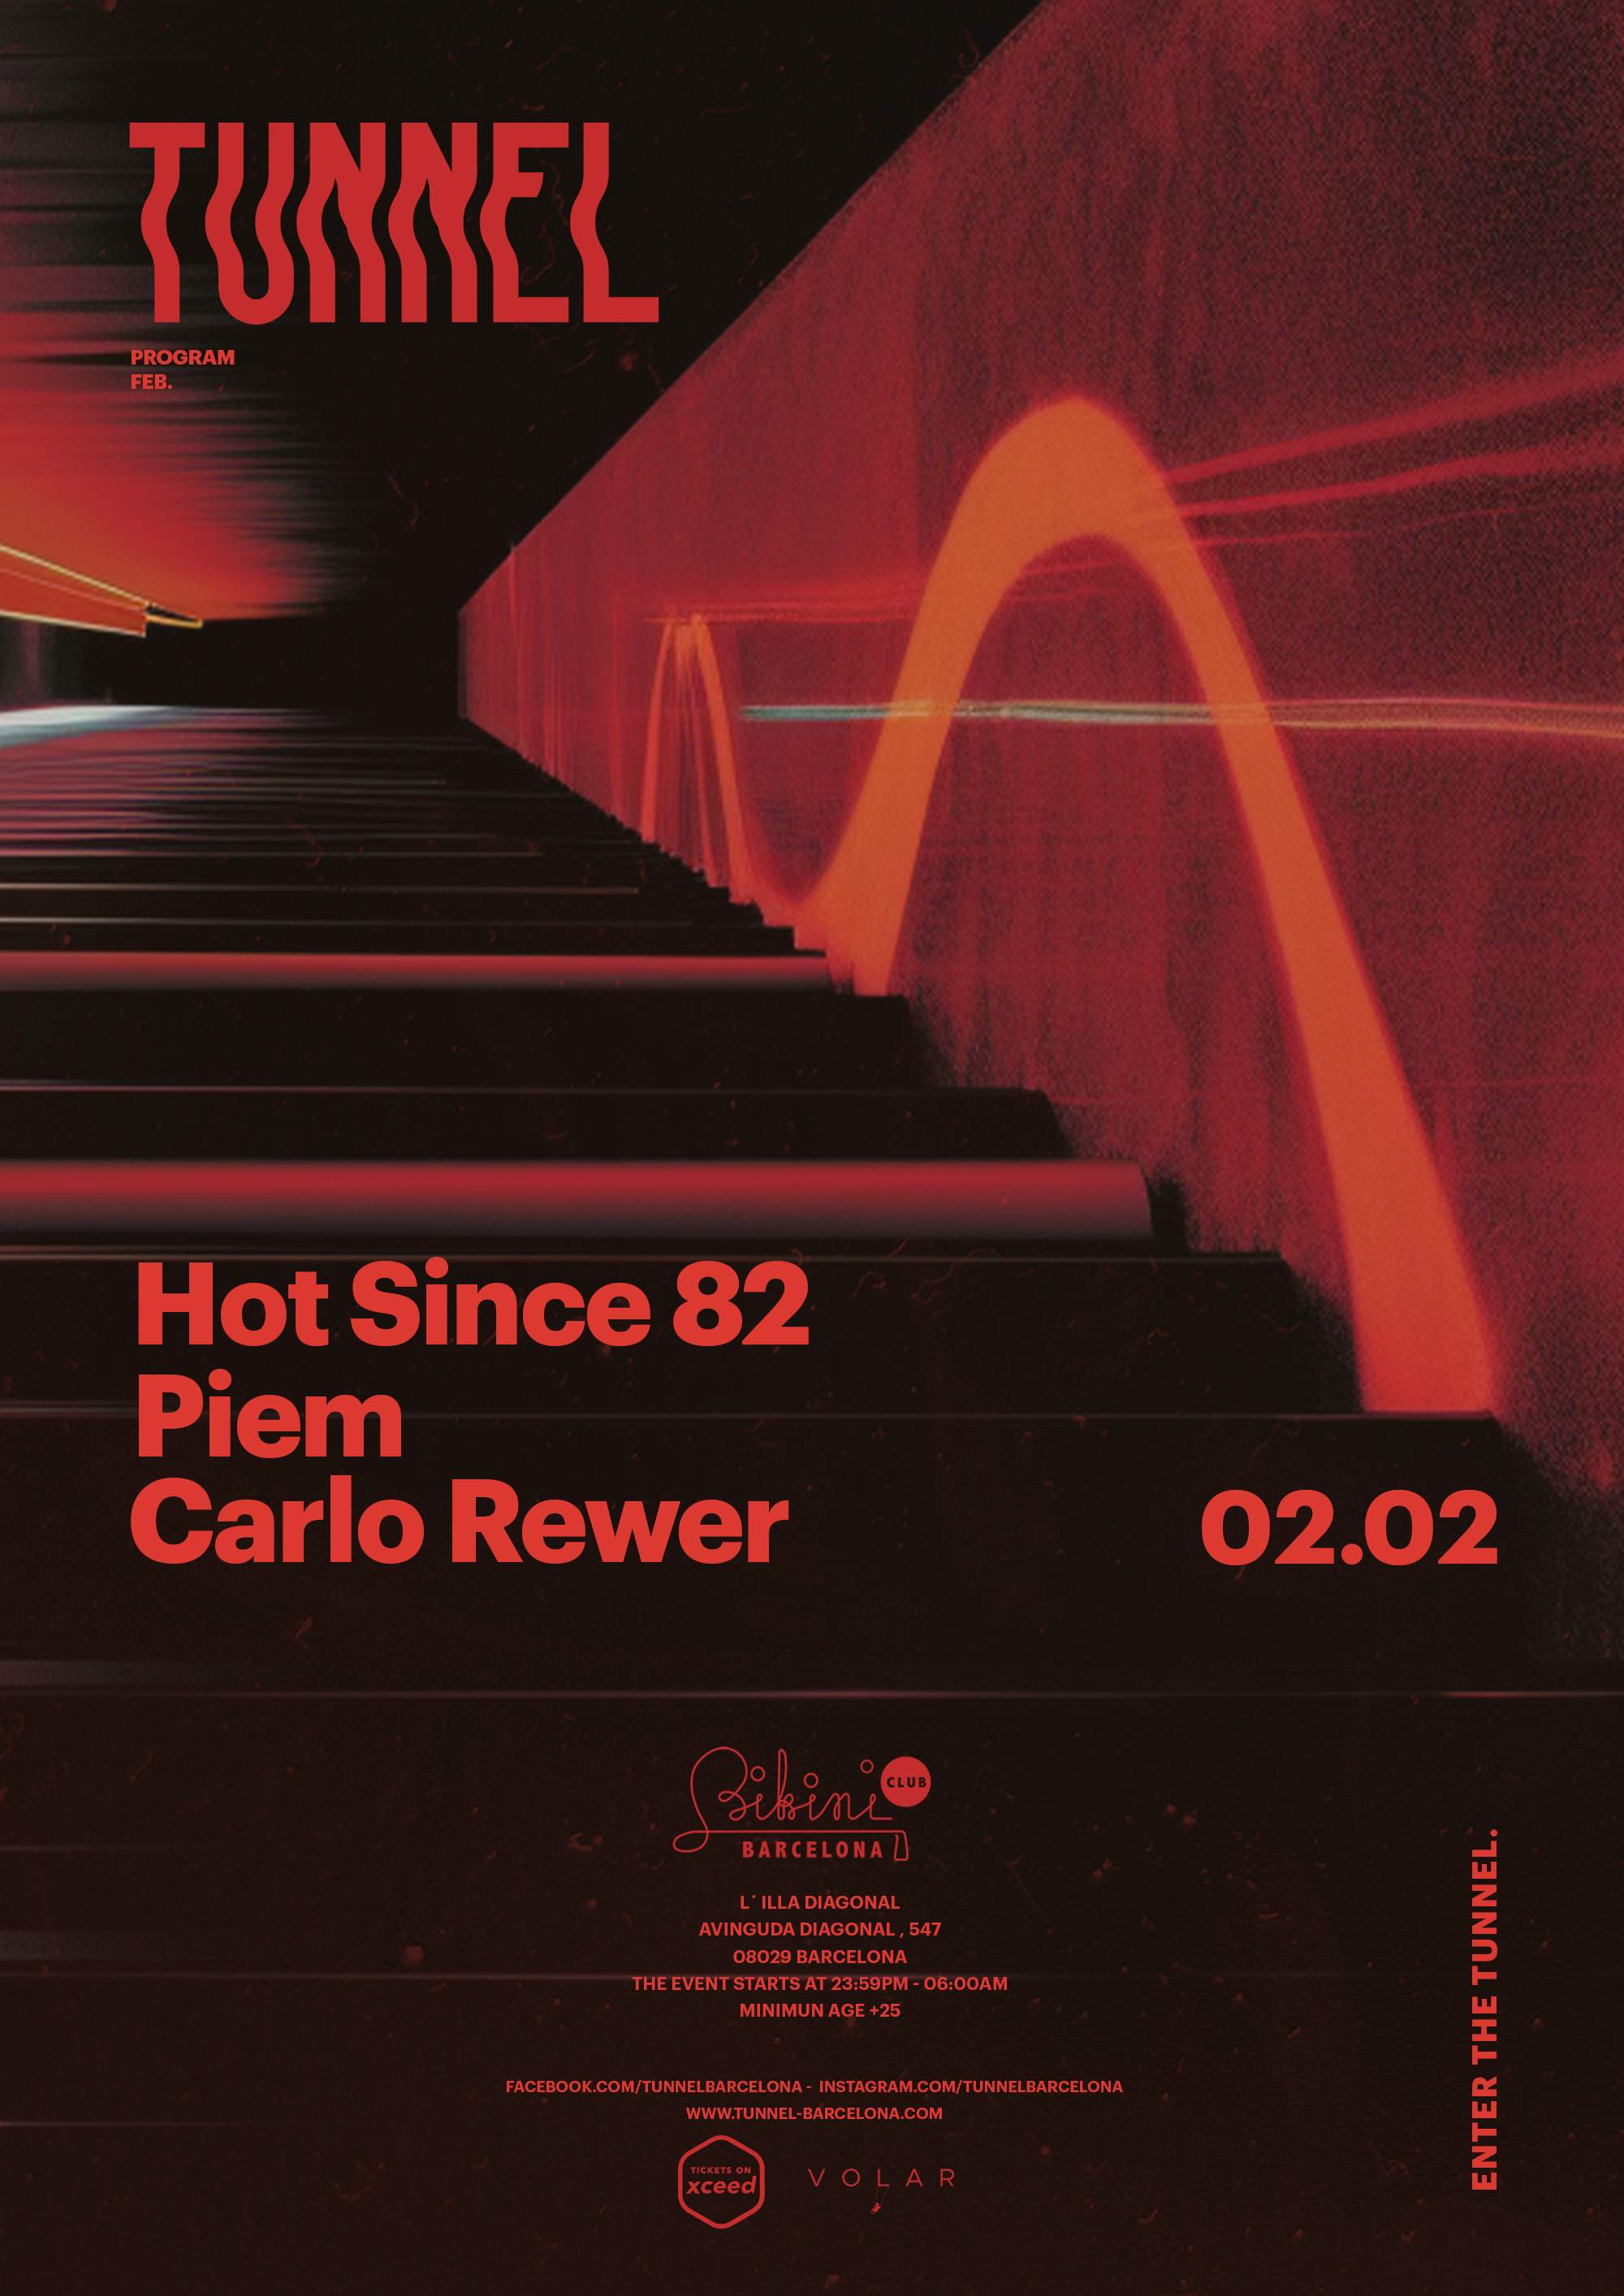 Tunnel pres. Hot Since 82, Piem, Carlo Rewer ///SOLD OUT/// - フライヤー表